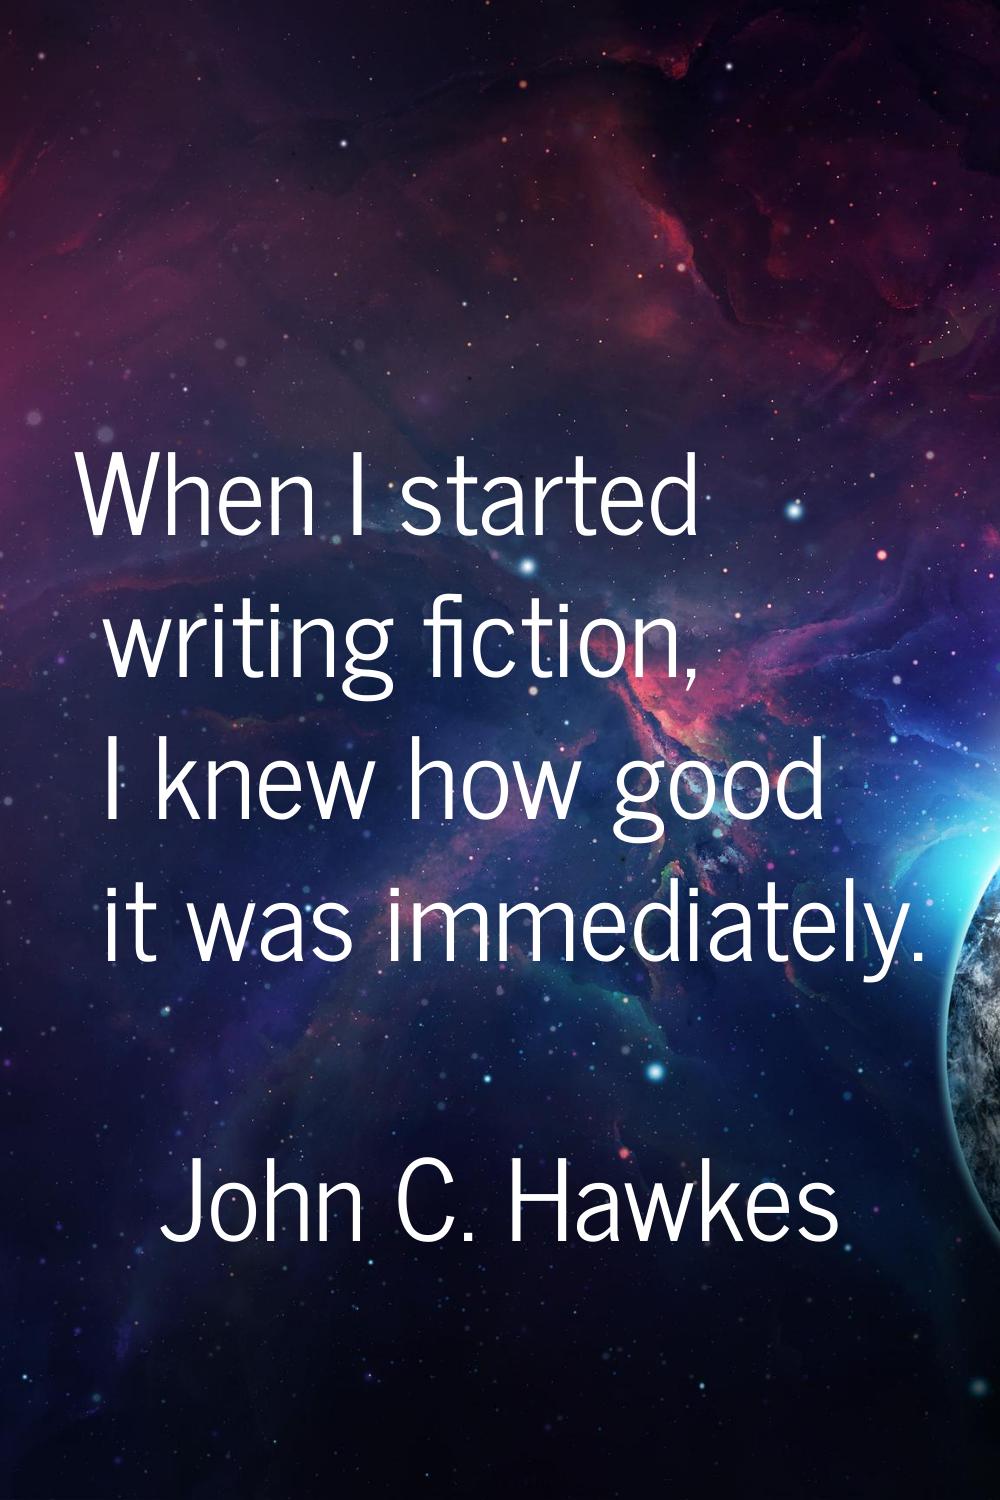 When I started writing fiction, I knew how good it was immediately.